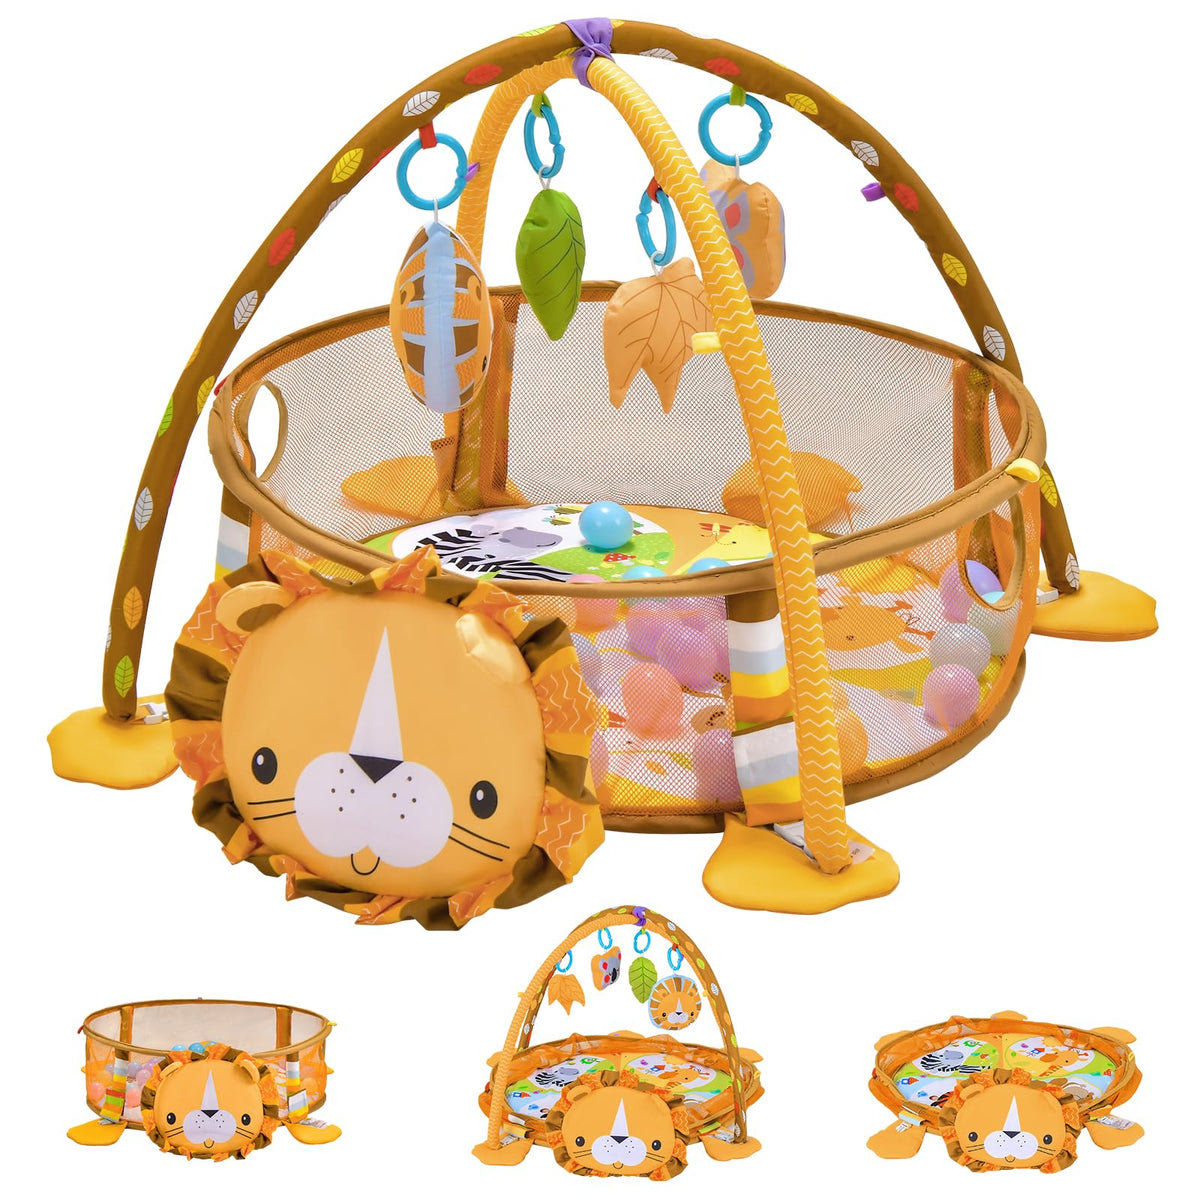 Baby Play Gym, 4-in-1 Baby Play Center for Newborn & Infants w/Soft Padding Mat & Arch Design